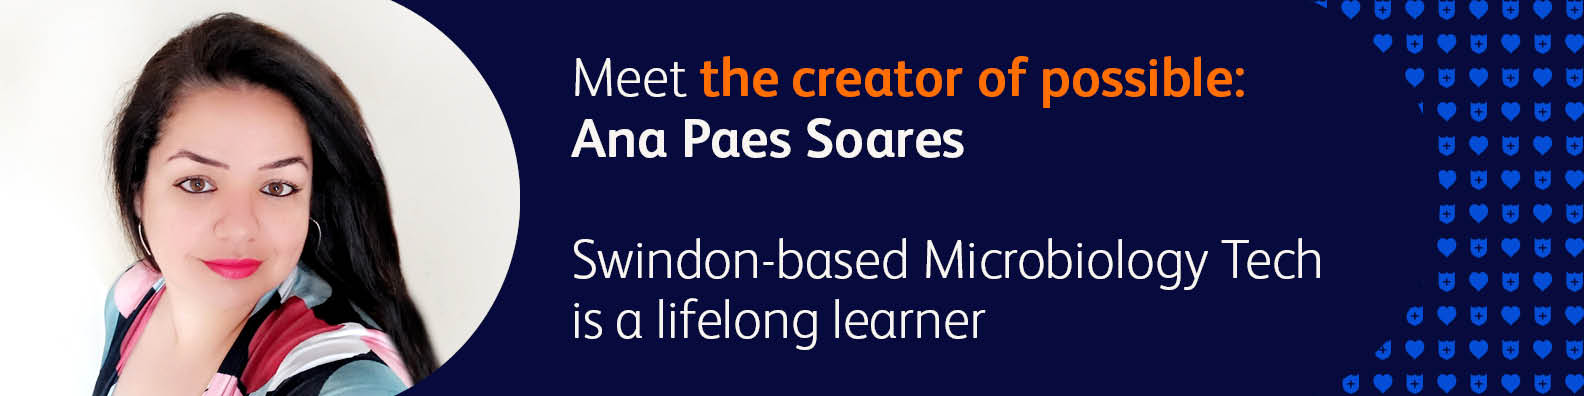 Ana Paes Soares, a Senior Microbiology Technician at the BD Swindon